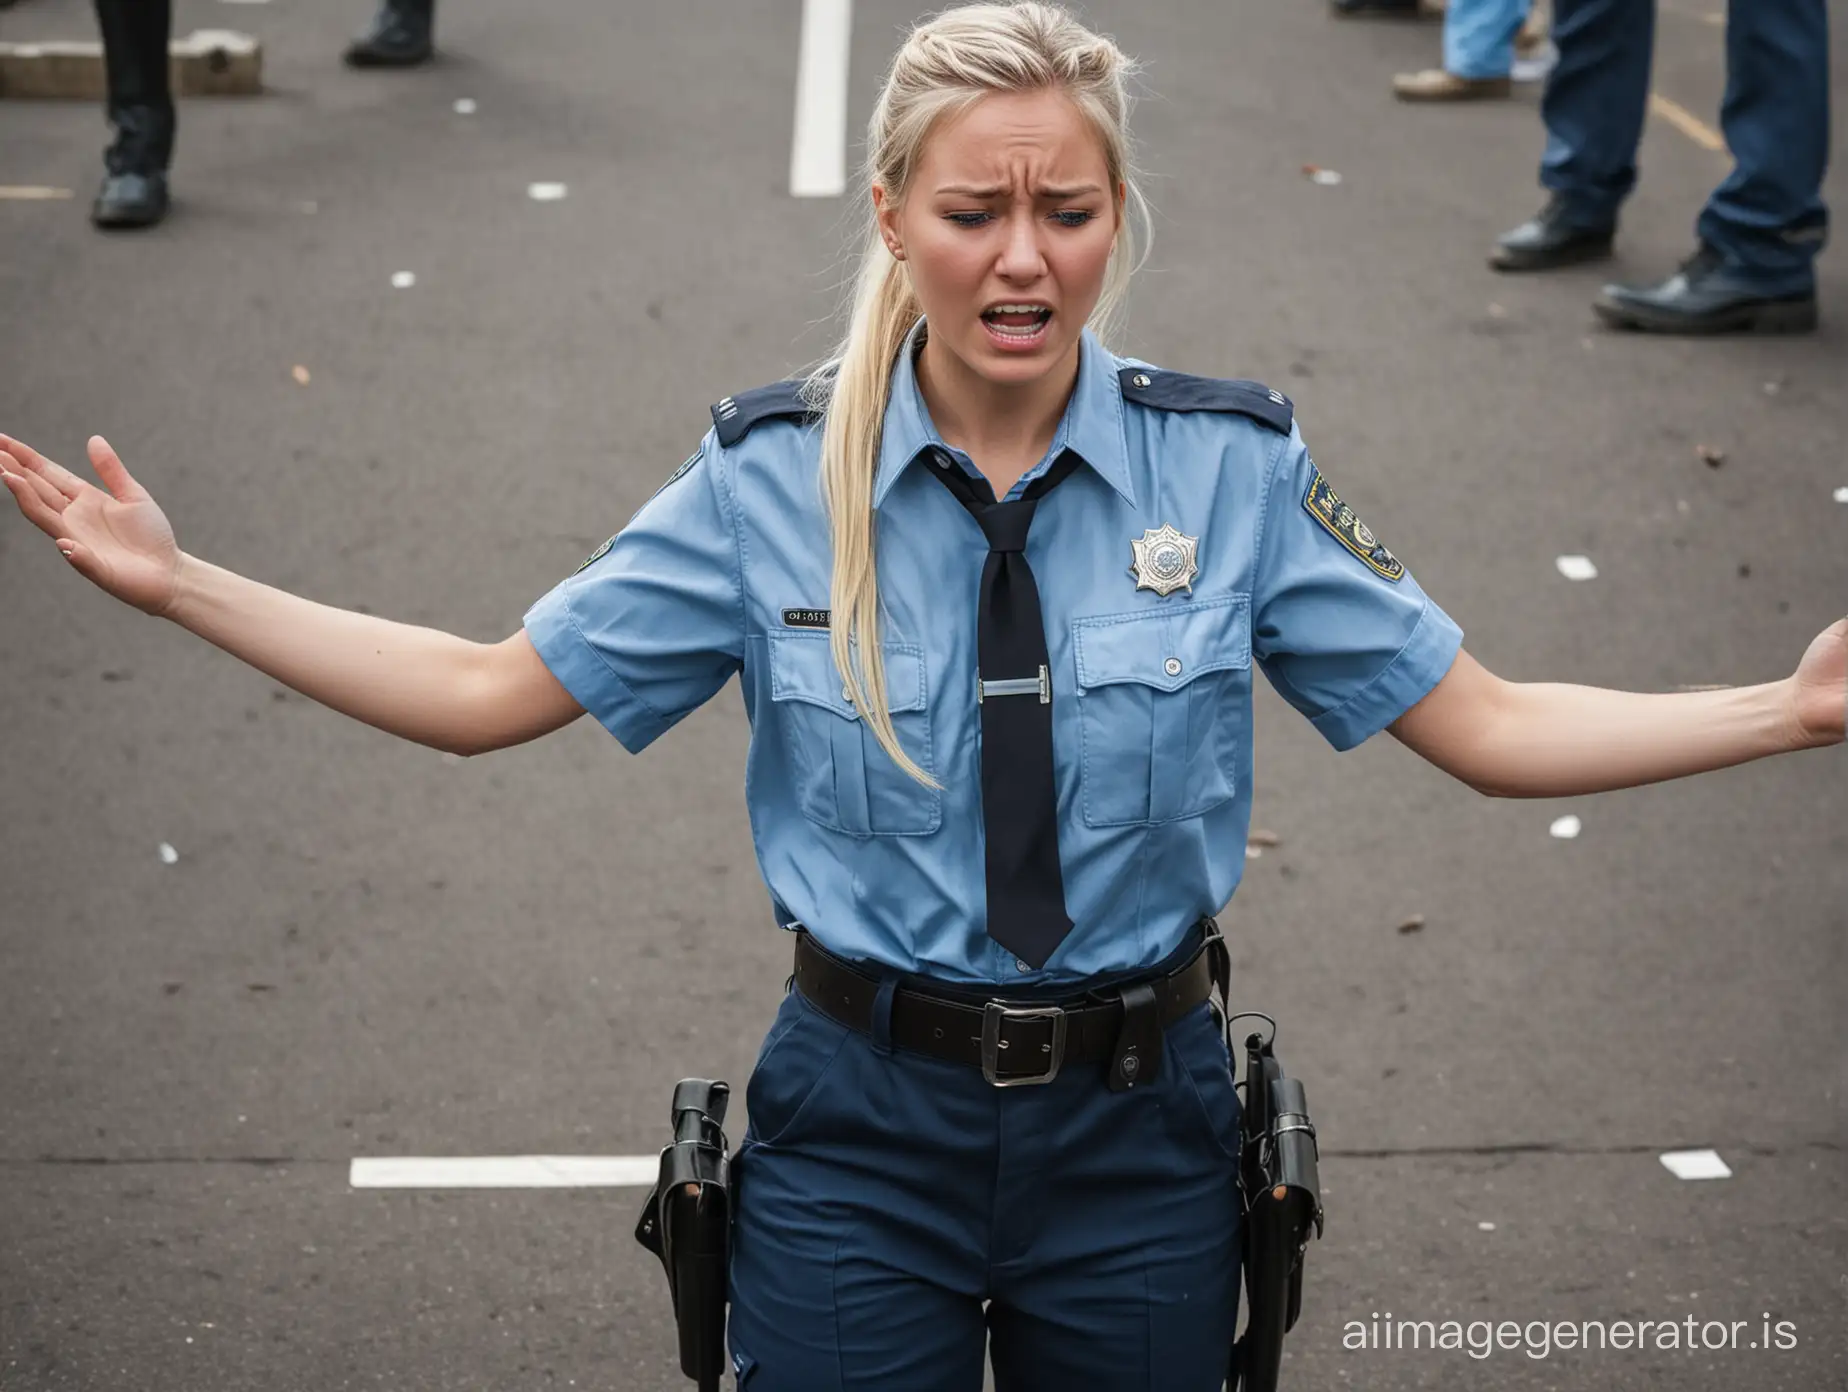 Distressed-Policewoman-Surrendering-in-Police-Station